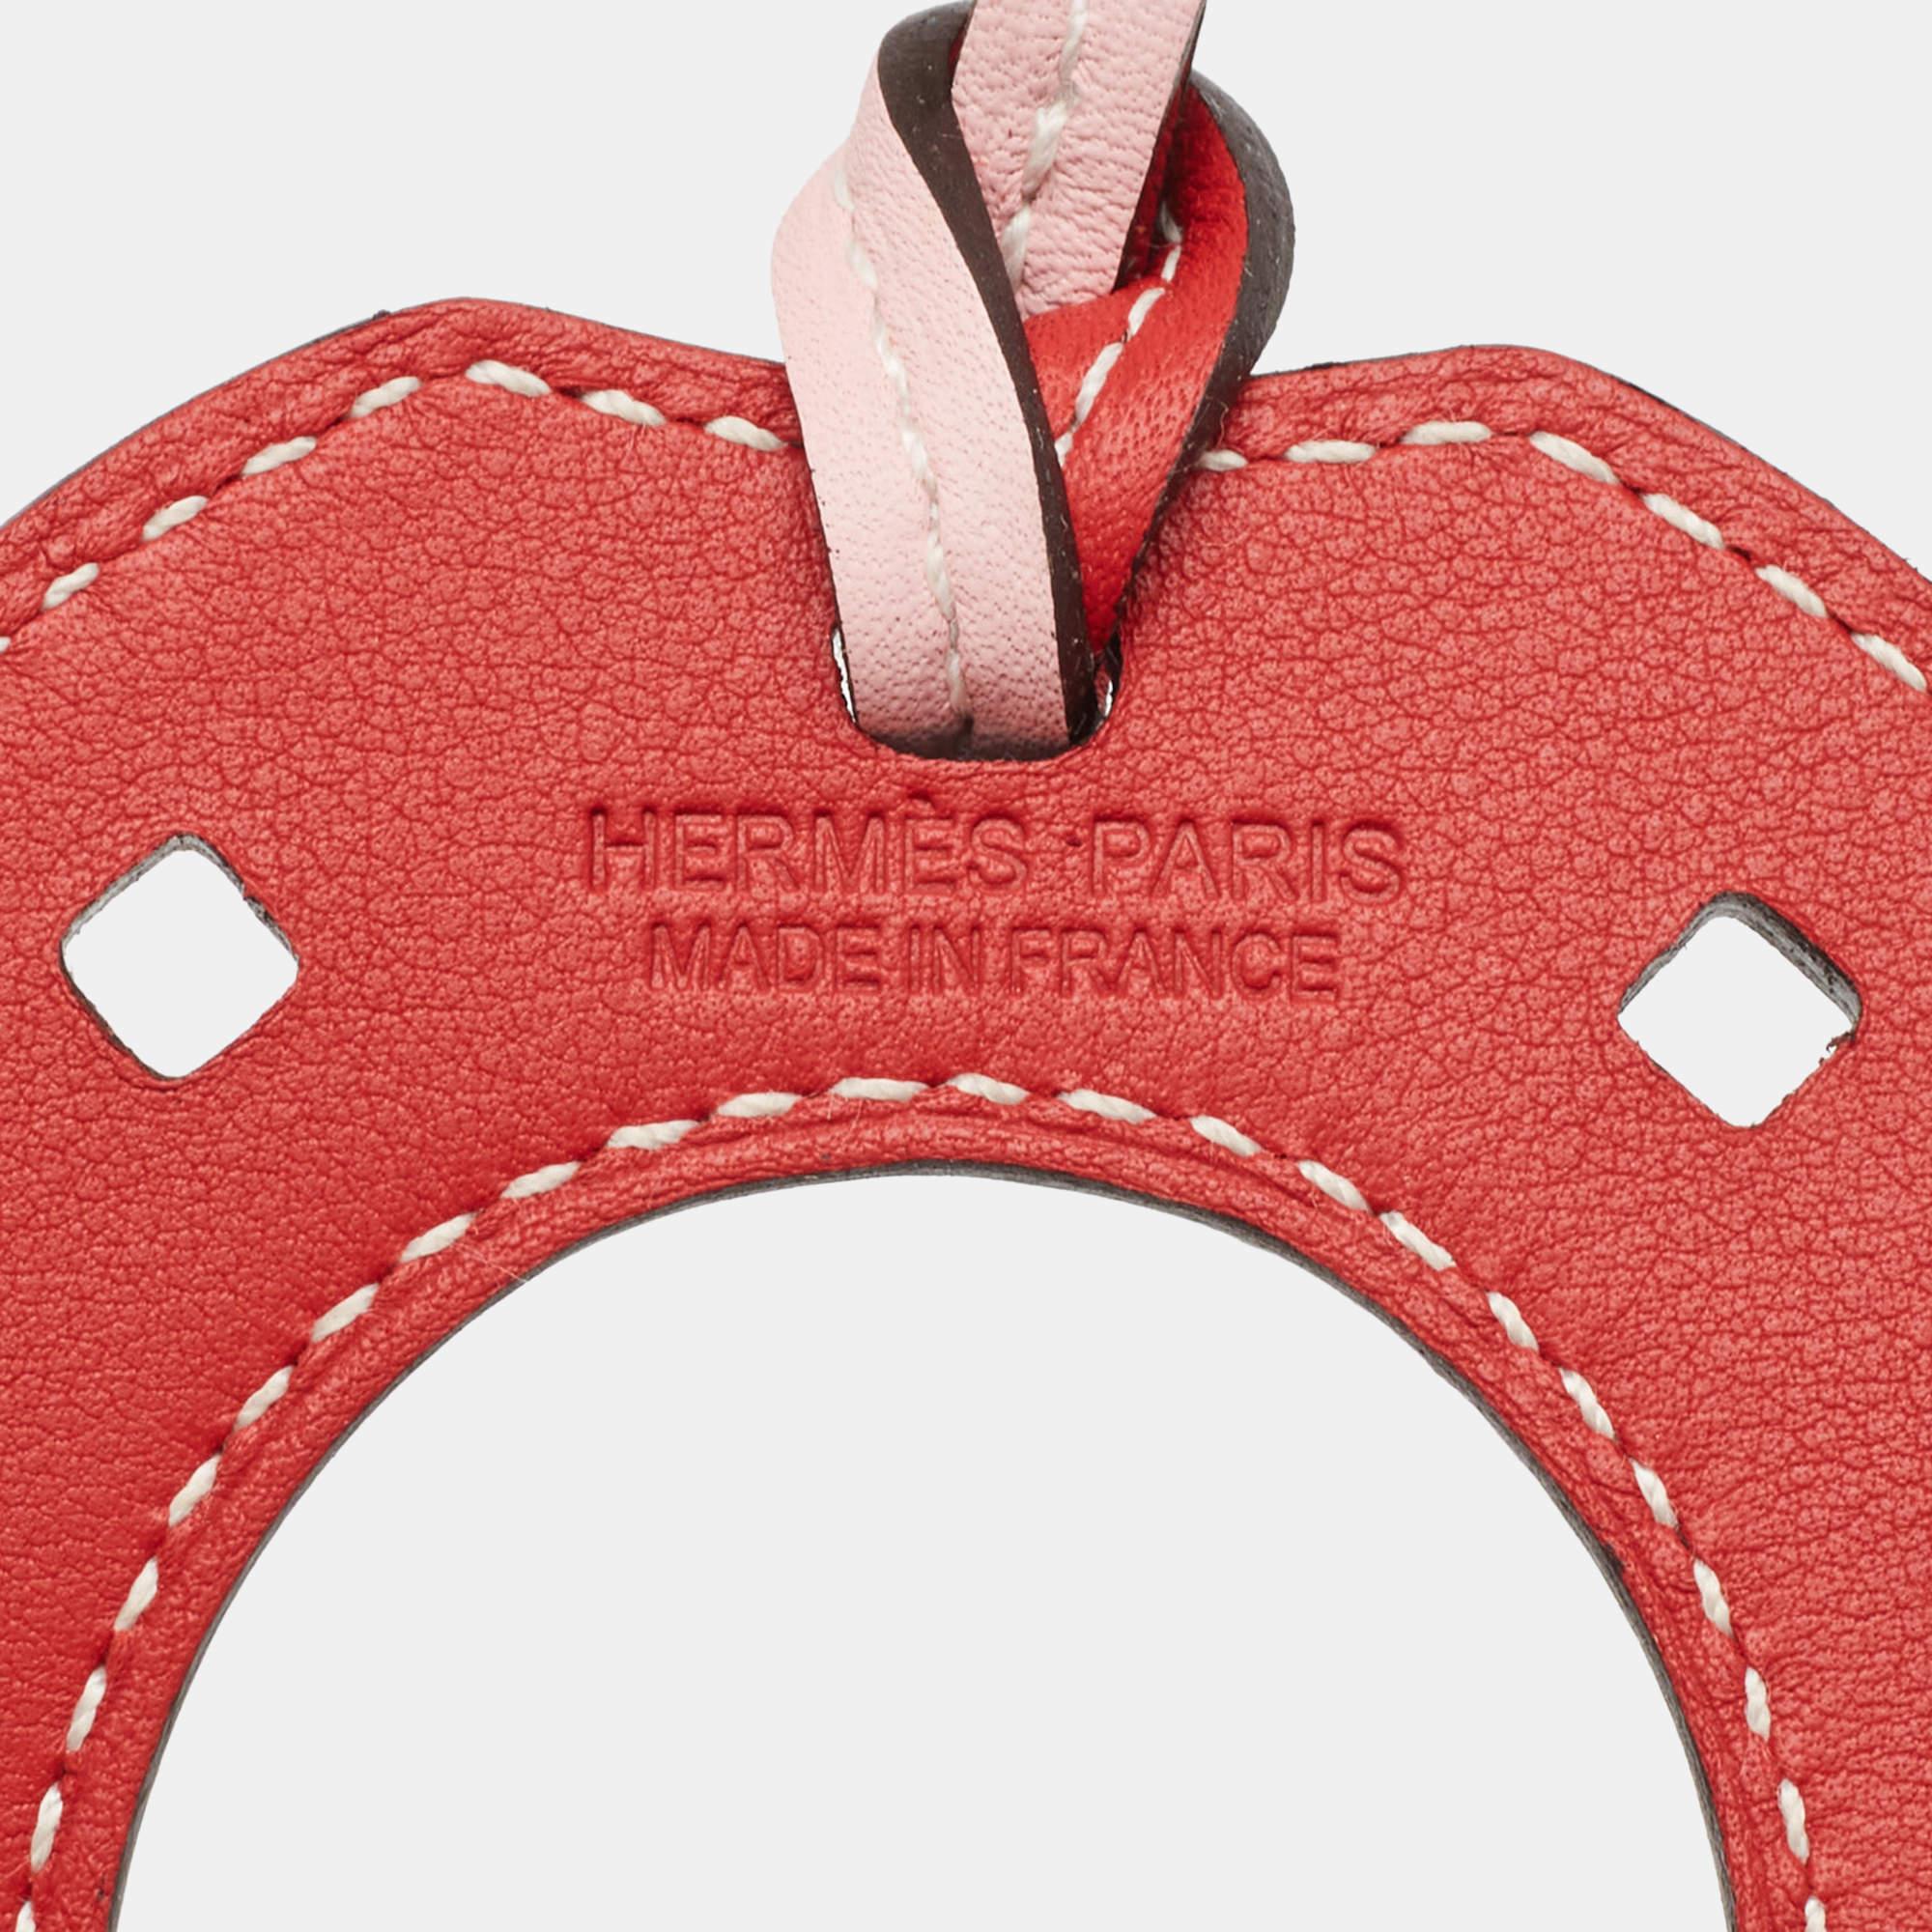 Paying homage to its equestrian heritage, this 'Paddock Fer a Cheval' bag charm from Hermès is a classy accessory to own. It is crafted using Swift leather and hangs from a strap. Needless to say, this Hermes bag charm will add a signature touch to